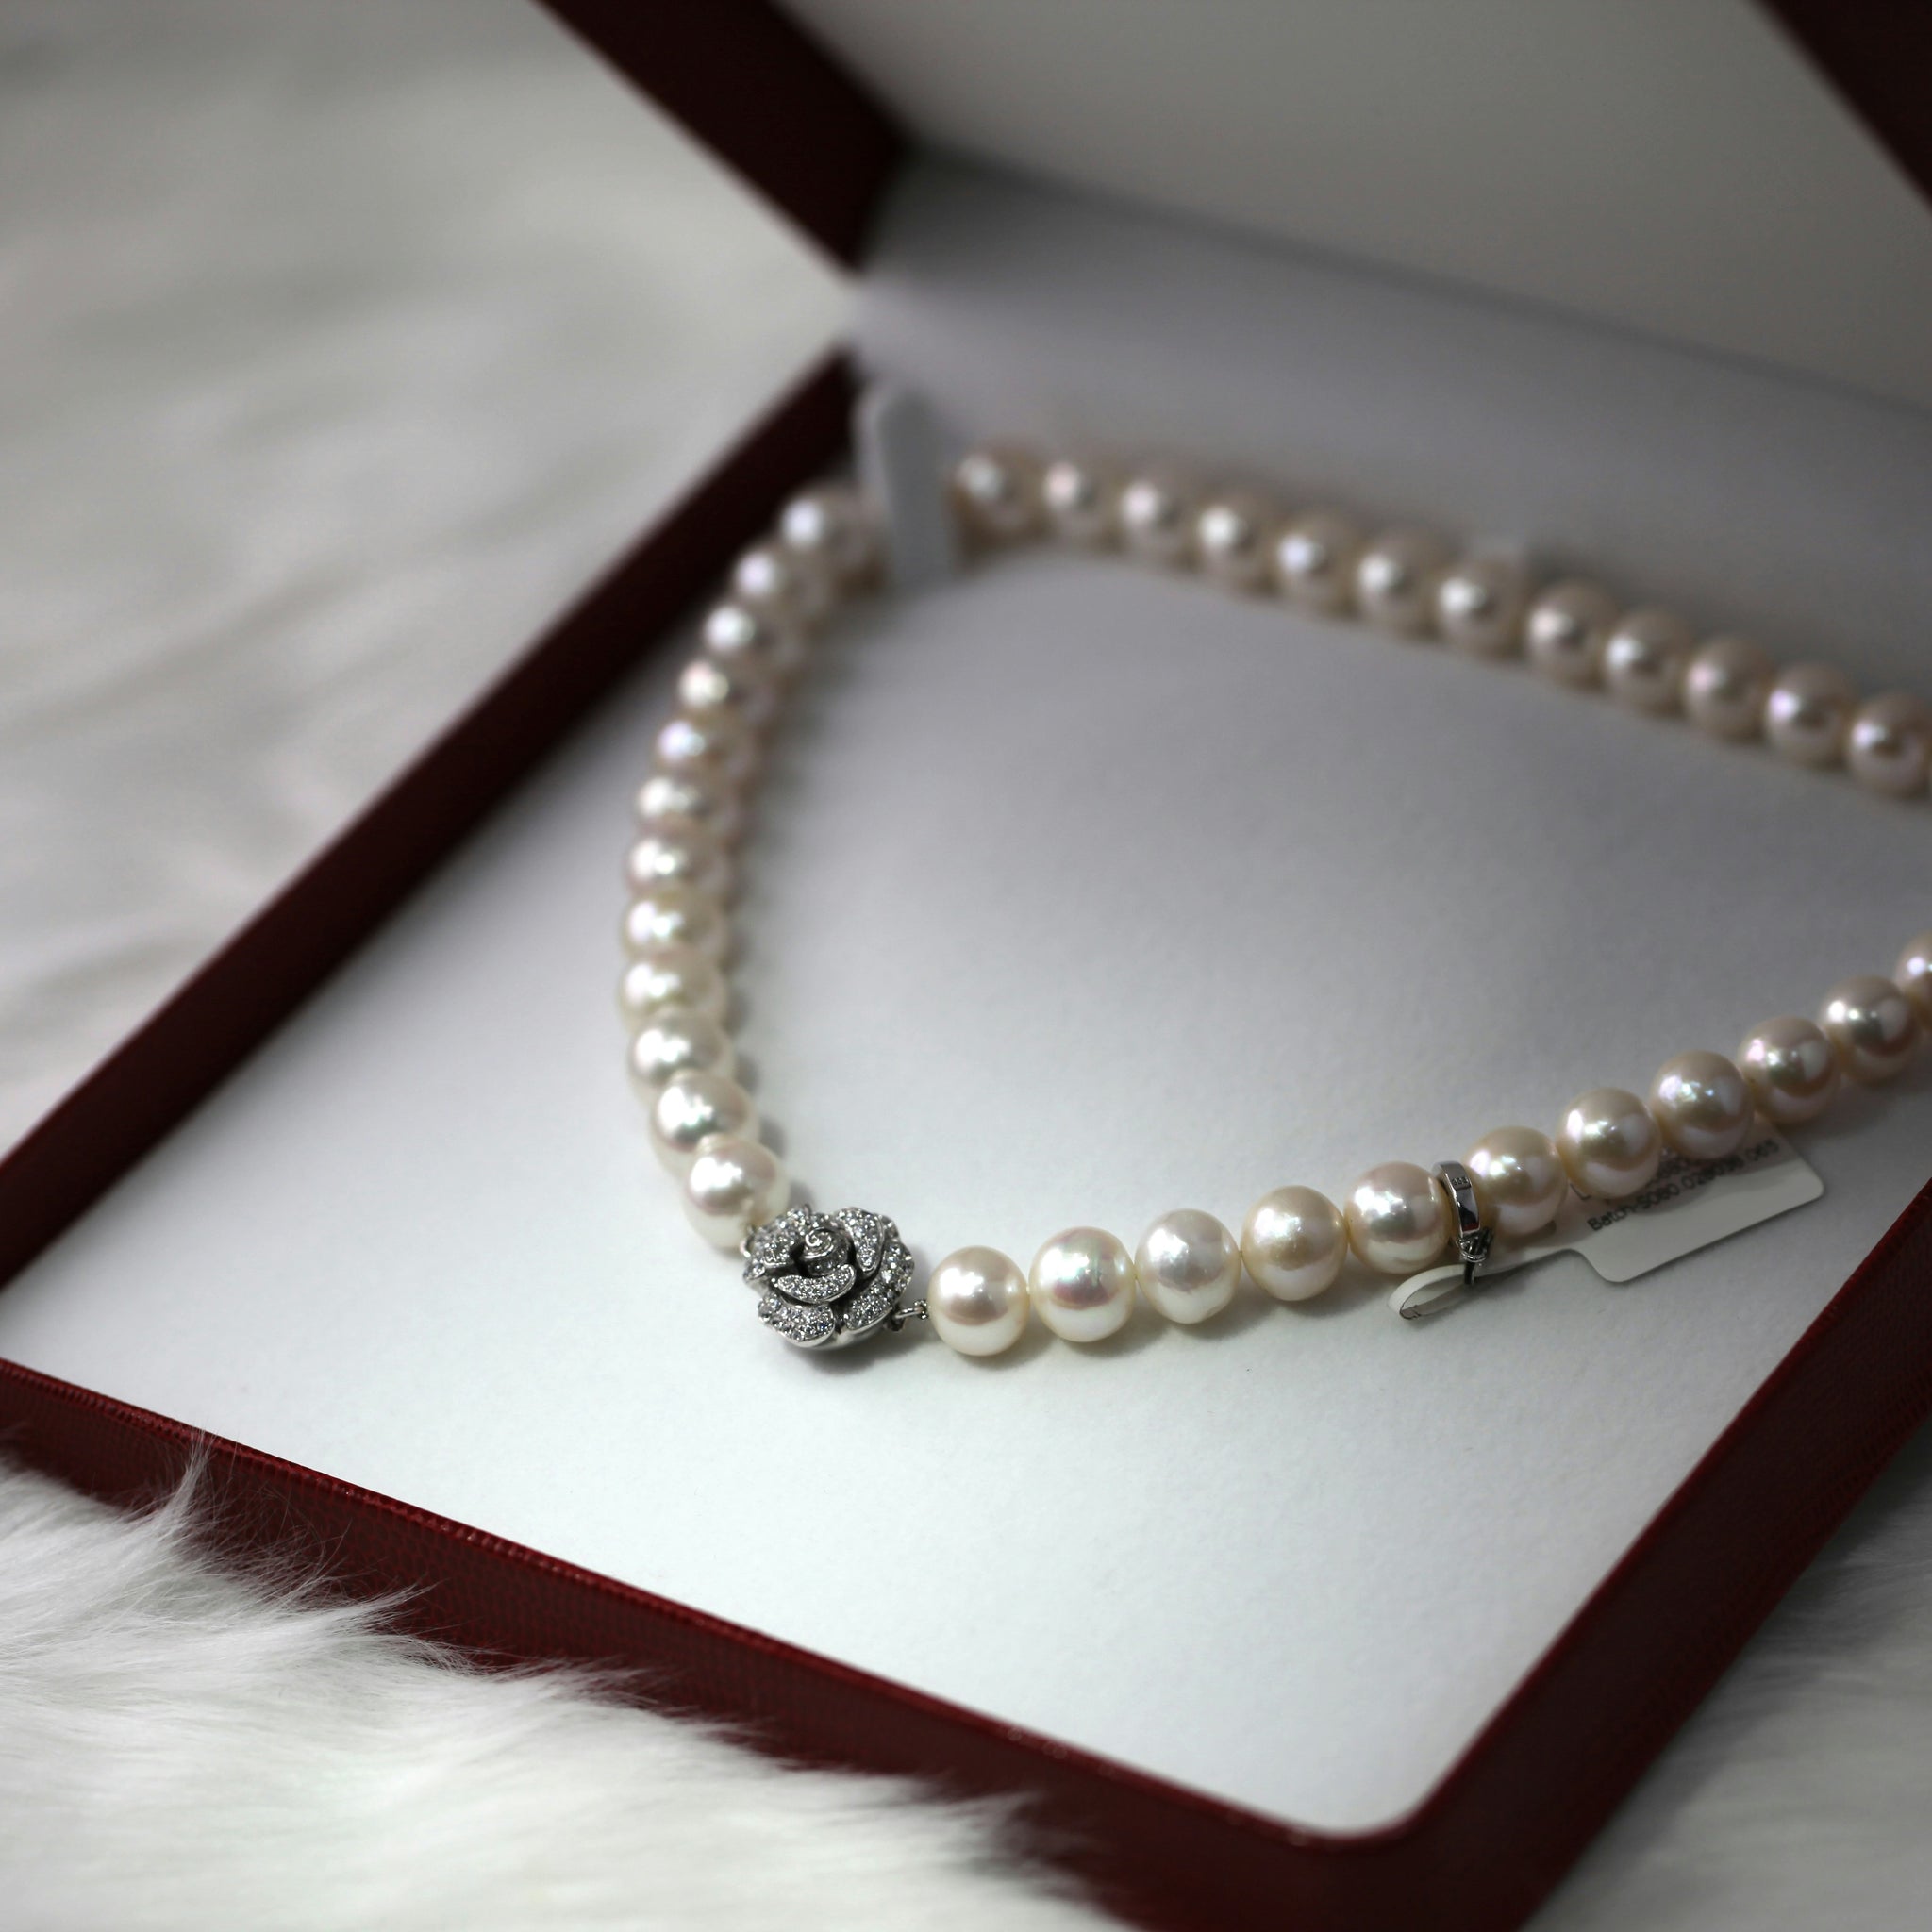 Ultimate Care Instructions for Pearl Jewellery to Preserve Their Beauty